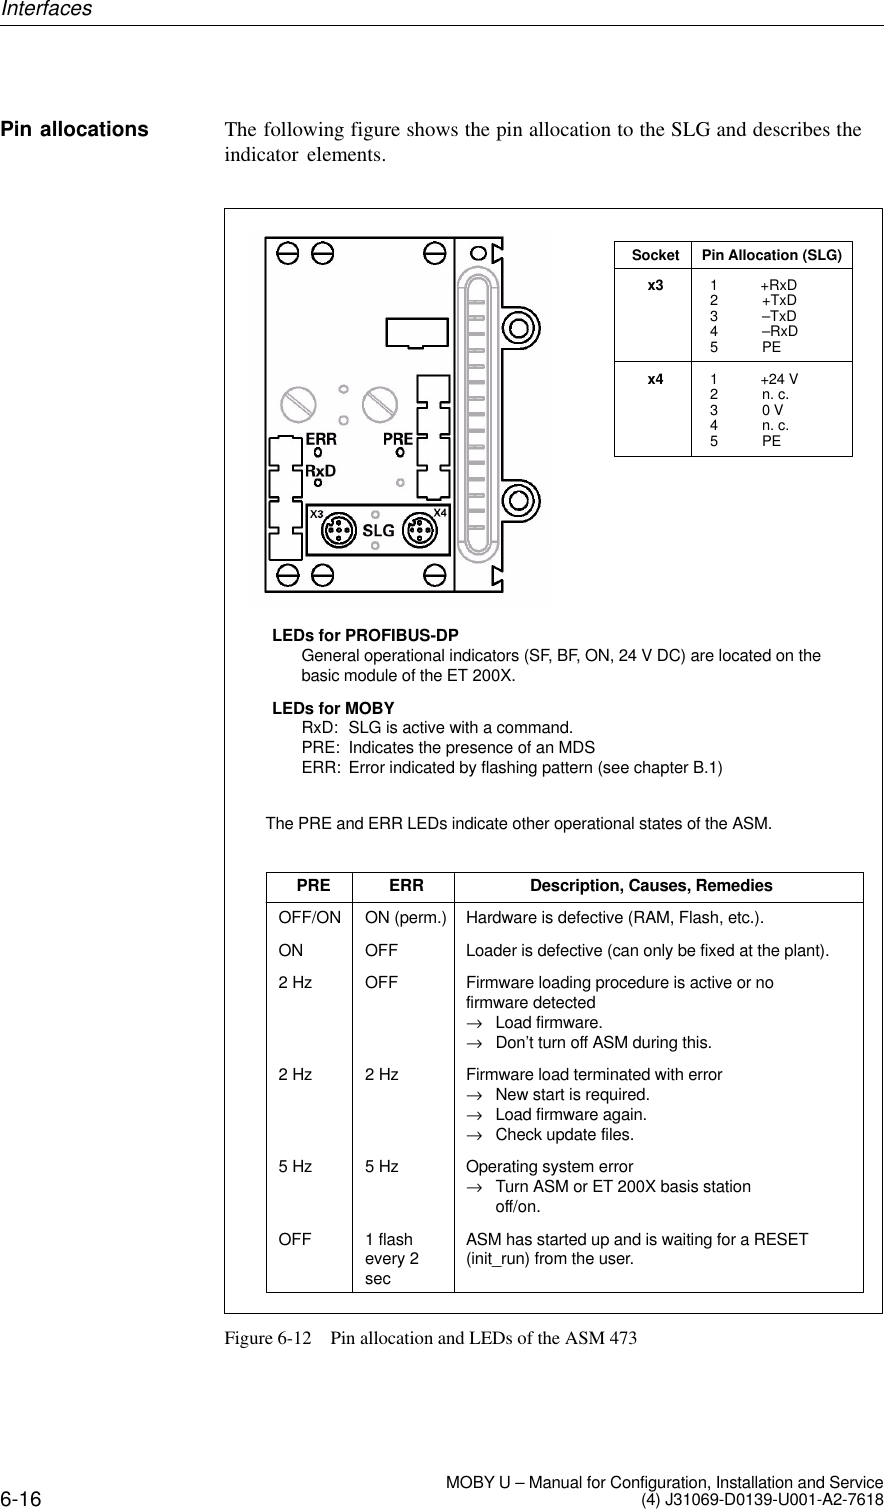 6-16 MOBY U – Manual for Configuration, Installation and Service(4) J31069-D0139-U001-A2-7618The following figure shows the pin allocation to the SLG and describes theindicator elements.ERRON (perm.)OFFOFF2 Hz5 Hz1 flashevery 2secPREOFF/ONON2 Hz2 Hz5 HzOFFSocket Pin Allocation (SLG)12345+RxD+TxD–TxD–RxDPELEDs for PROFIBUS-DPGeneral operational indicators (SF, BF, ON, 24 V DC) are located on the  basic module of the ET 200X.LEDs for MOBYRxD: SLG is active with a command.PRE: Indicates the presence of an MDSERR: Error indicated by flashing pattern (see chapter B.1)x312345+24 Vn. c.0 Vn. c.PEx4The PRE and ERR LEDs indicate other operational states of the ASM.Description, Causes, RemediesHardware is defective (RAM, Flash, etc.).Loader is defective (can only be fixed at the plant).Firmware loading procedure is active or nofirmware detected→Load firmware.→Don’t turn off ASM during this.Firmware load terminated with error→New start is required.→Load firmware again.→Check update files.Operating system error→Turn ASM or ET 200X basis station off/on.ASM has started up and is waiting for a RESET(init_run) from the user.Figure 6-12 Pin allocation and LEDs of the ASM 473Pin allocationsInterfaces